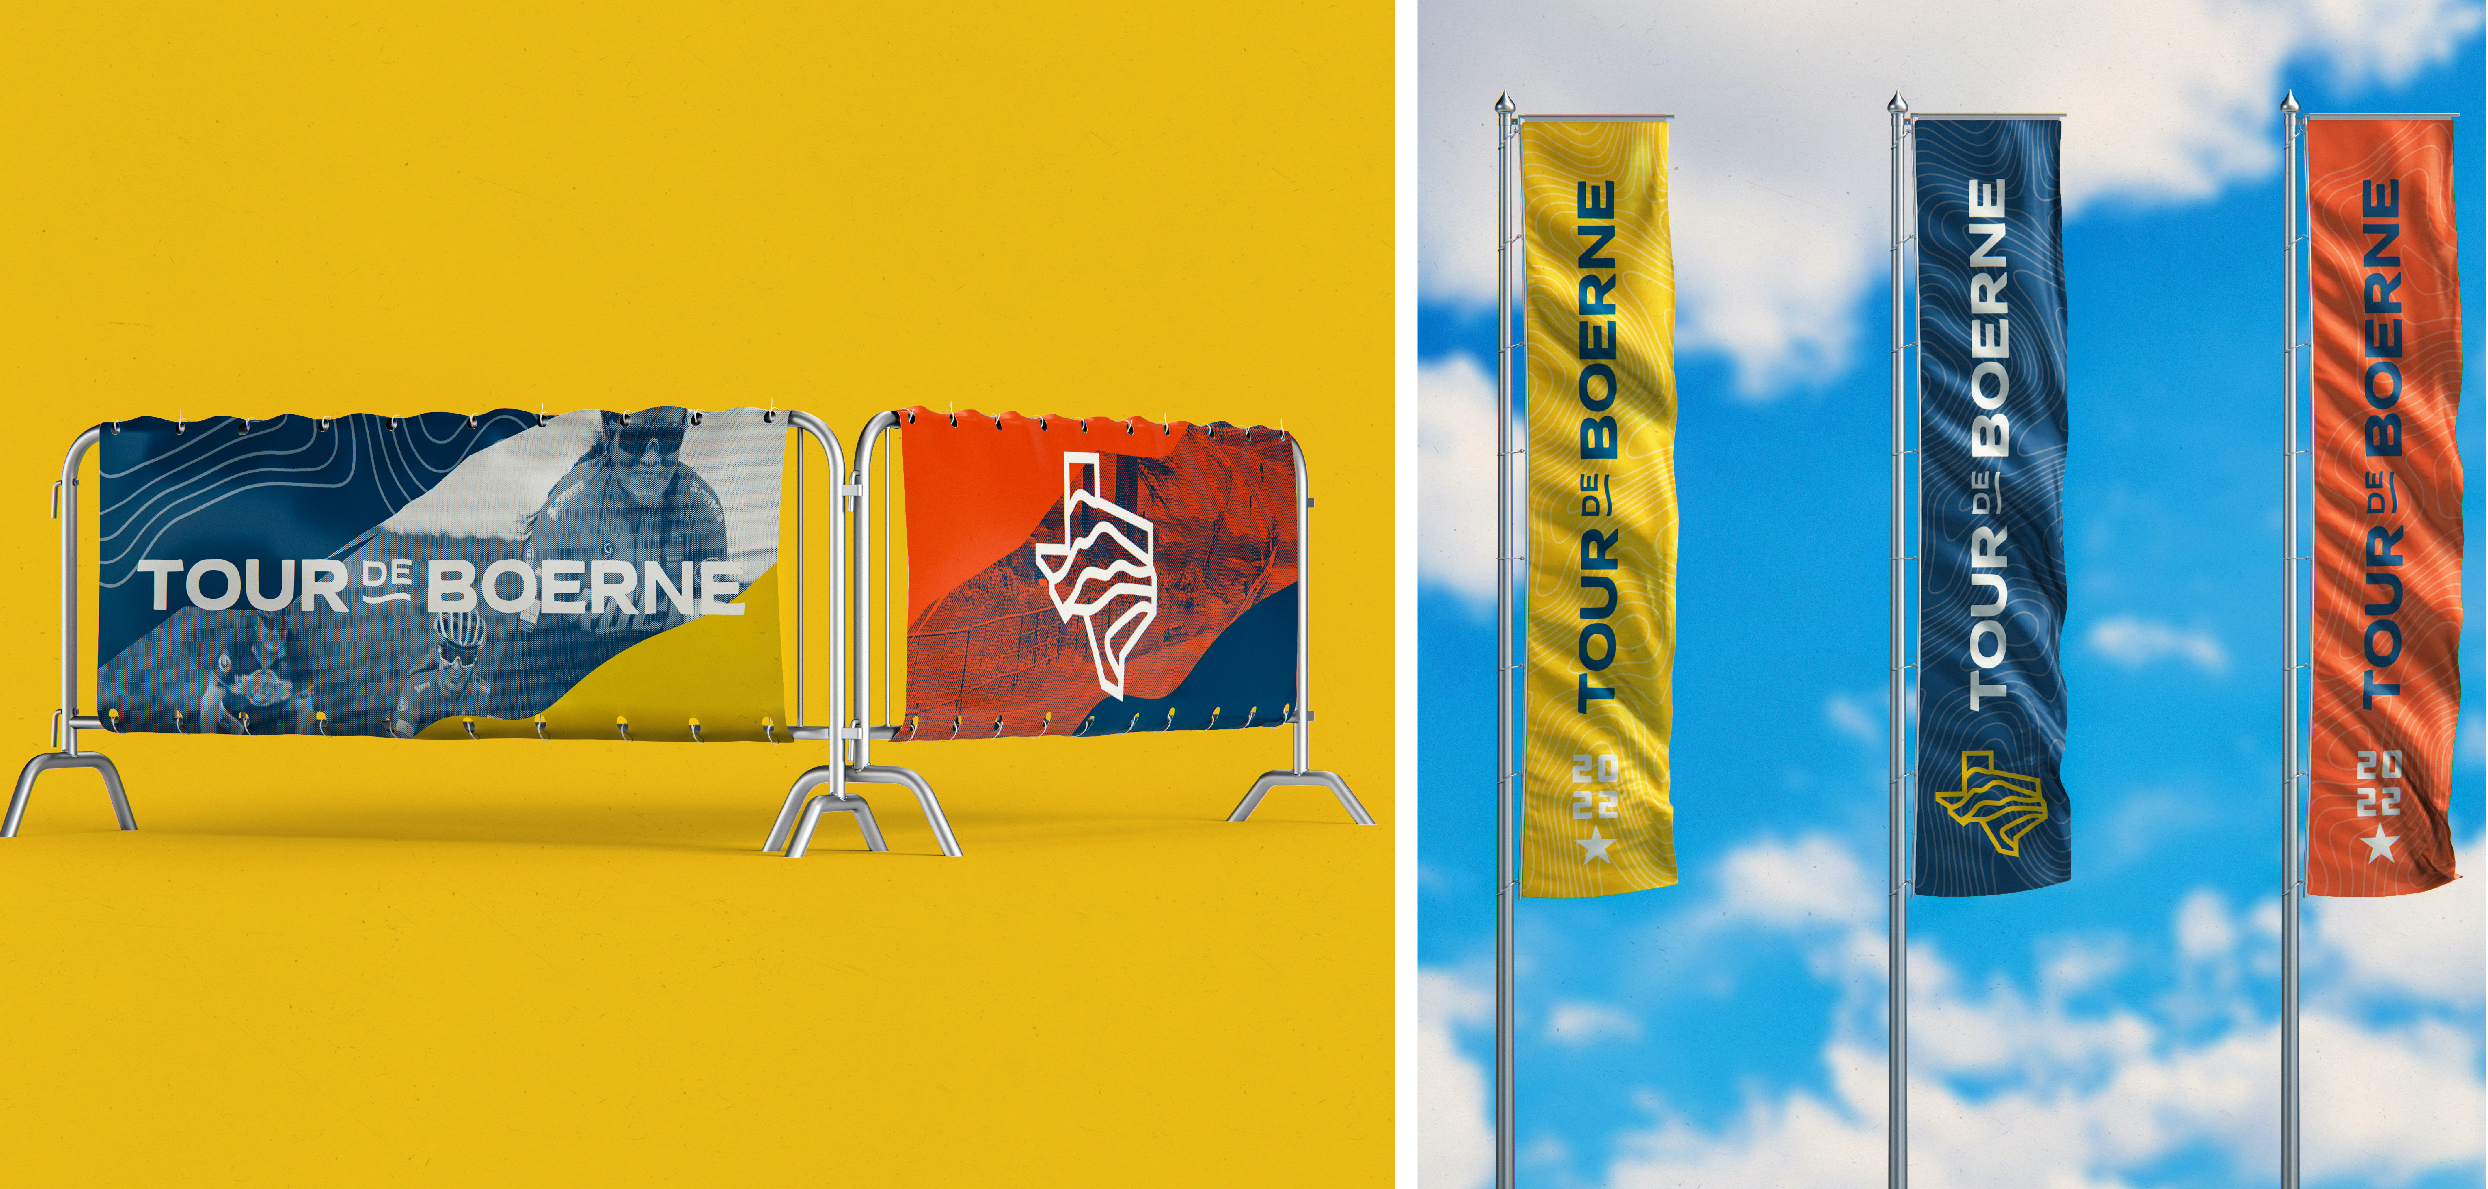 Showing some signage and flags bearing the Tour de Boerne logo. Branding designed by MDR for this San Antonio-based organization.